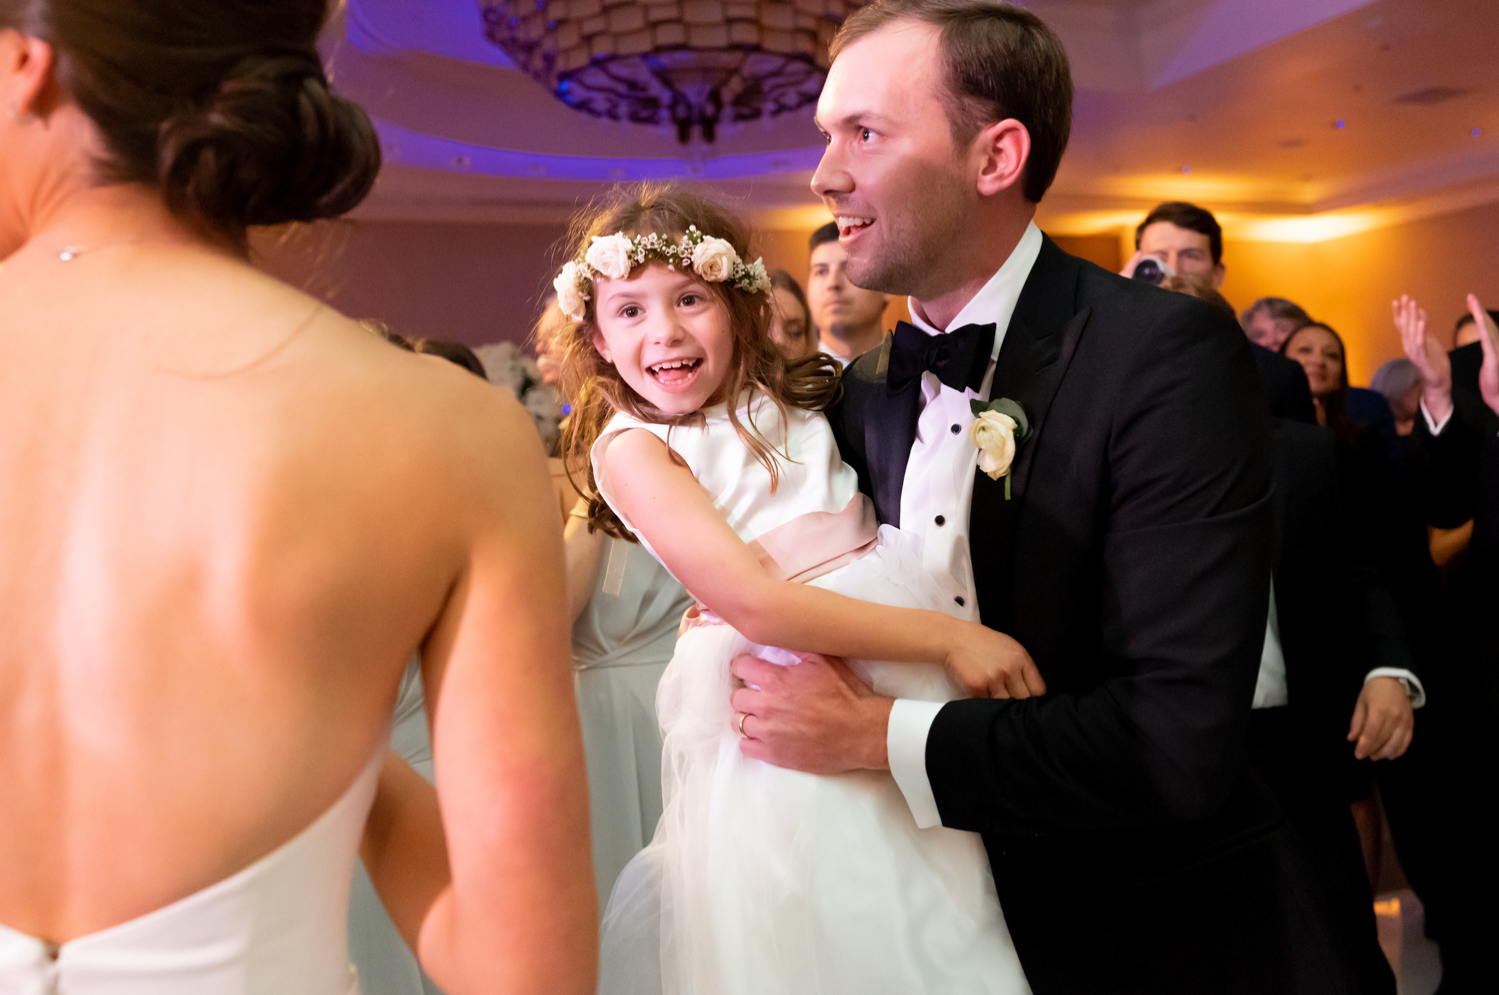 The groom holds the flower girl and they dance to the music.